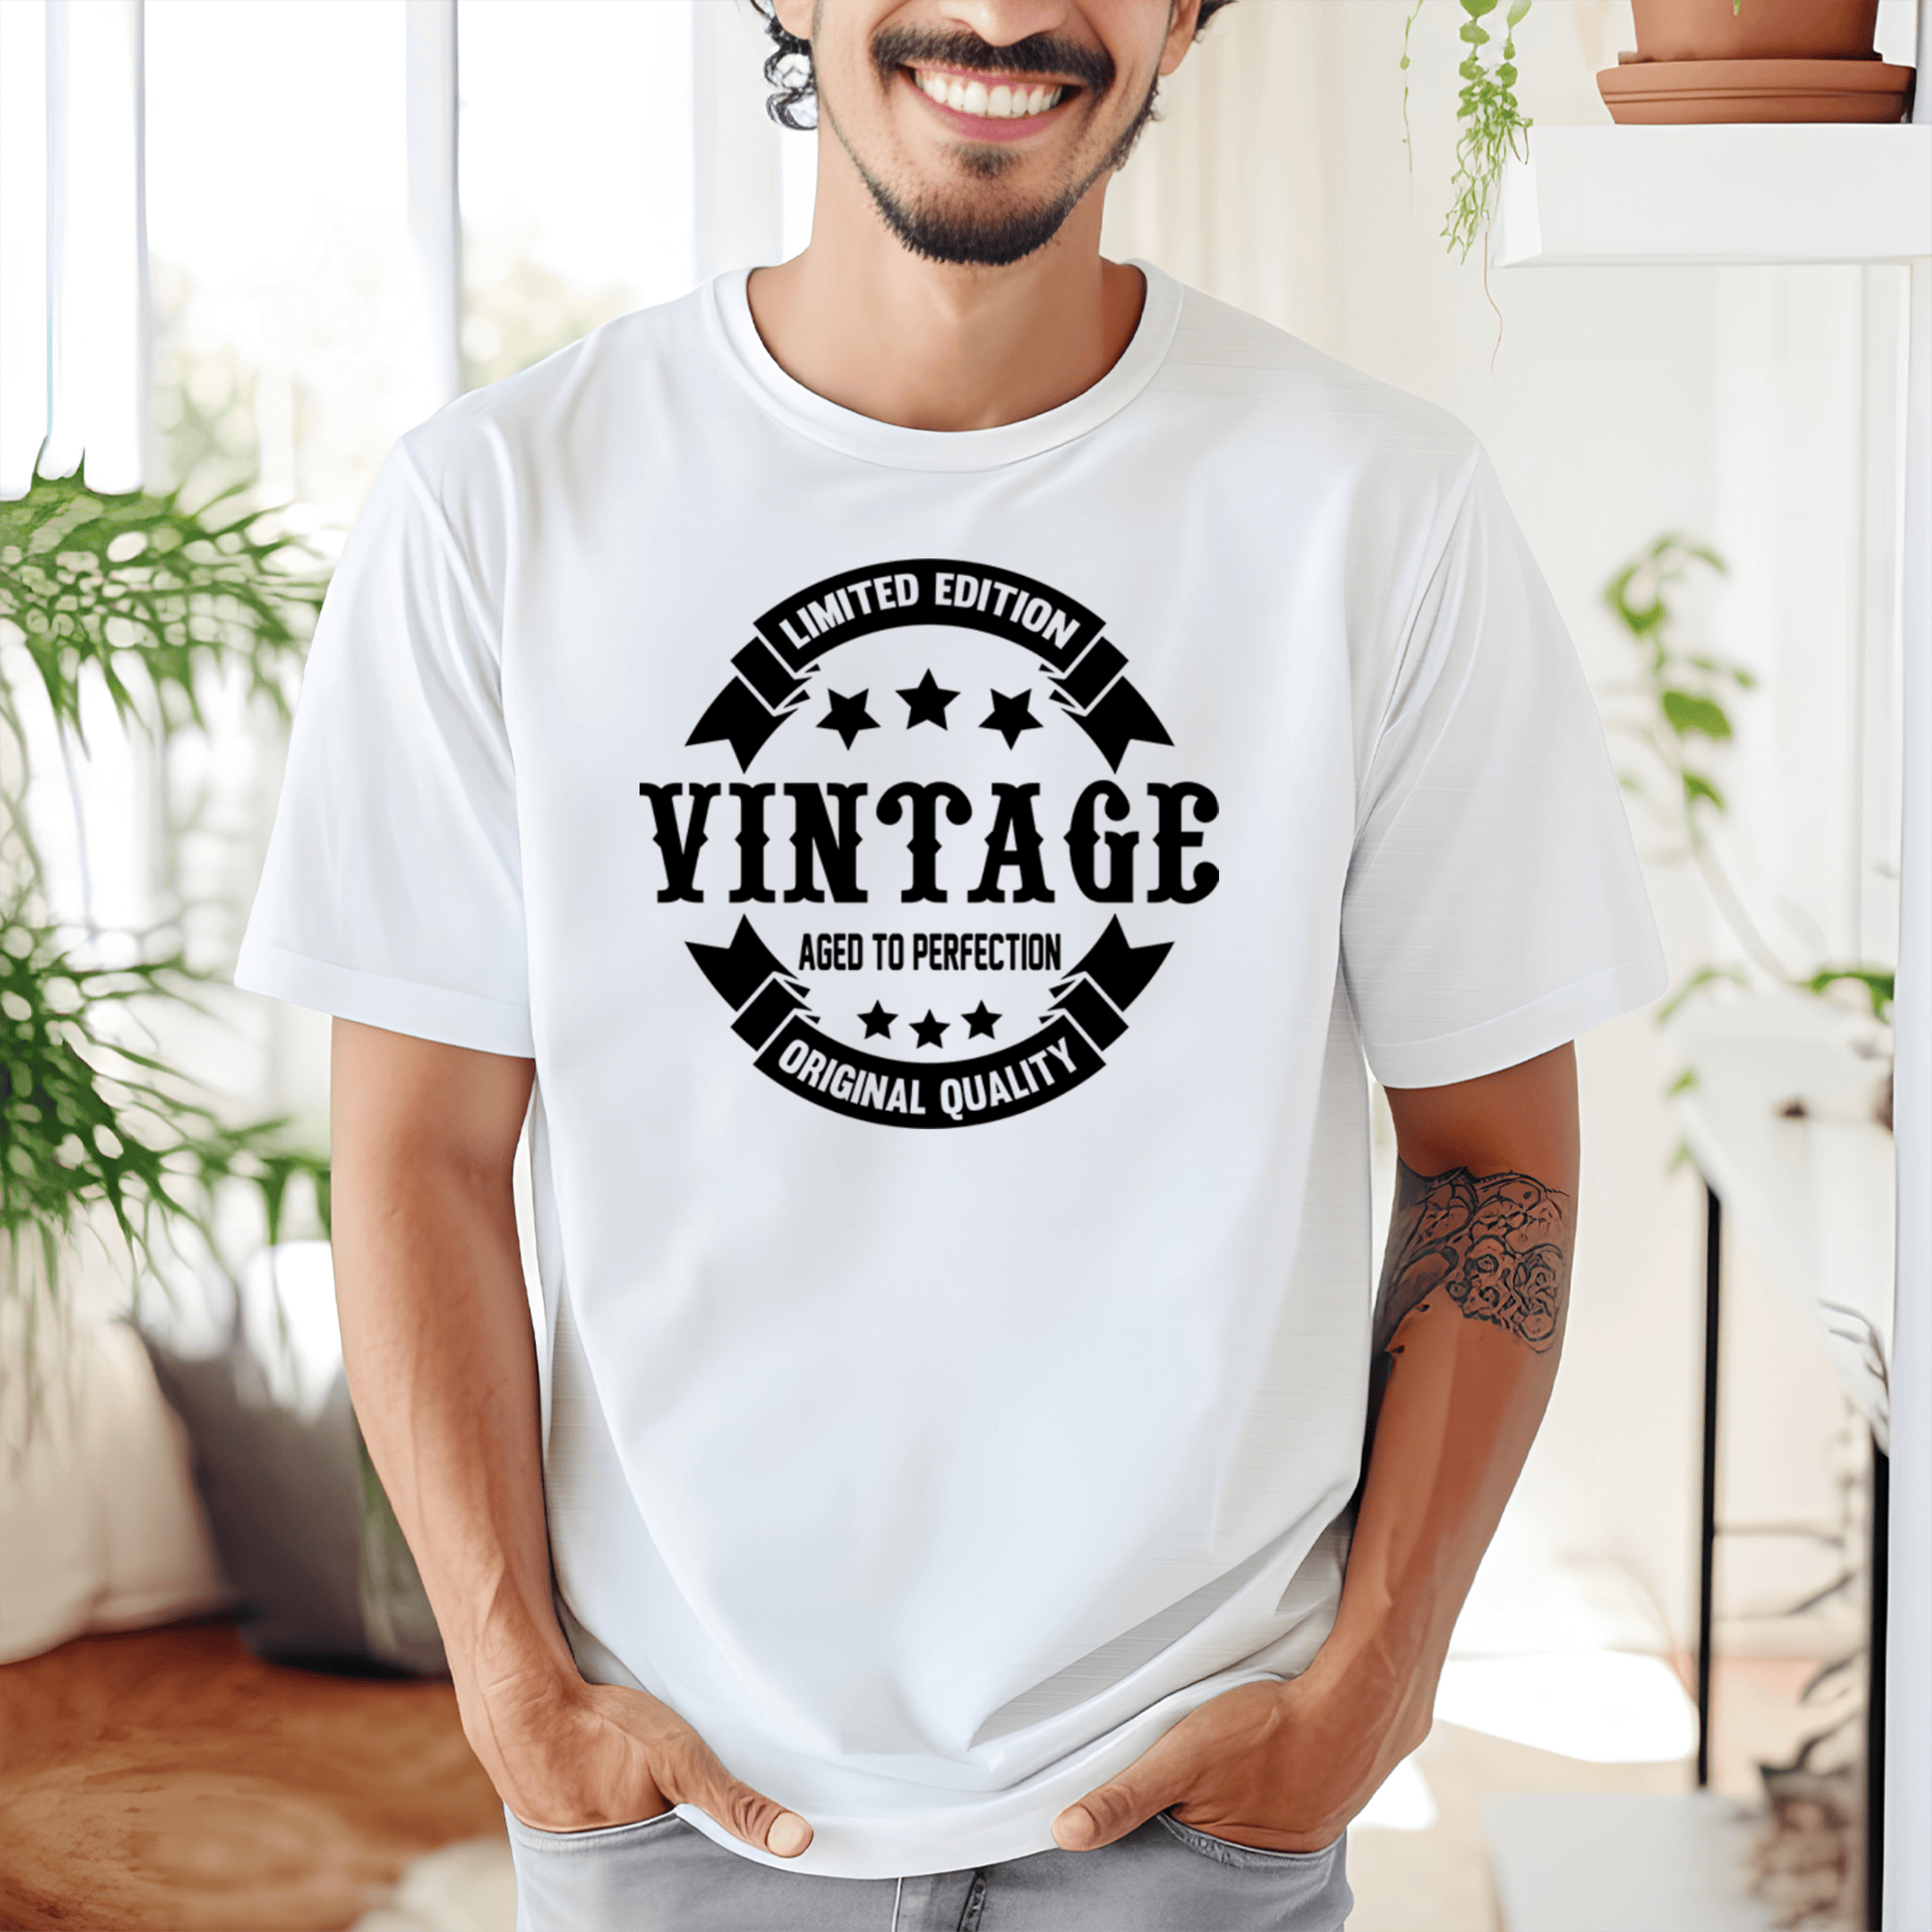 Mens White T Shirt with Vintage-Quality design